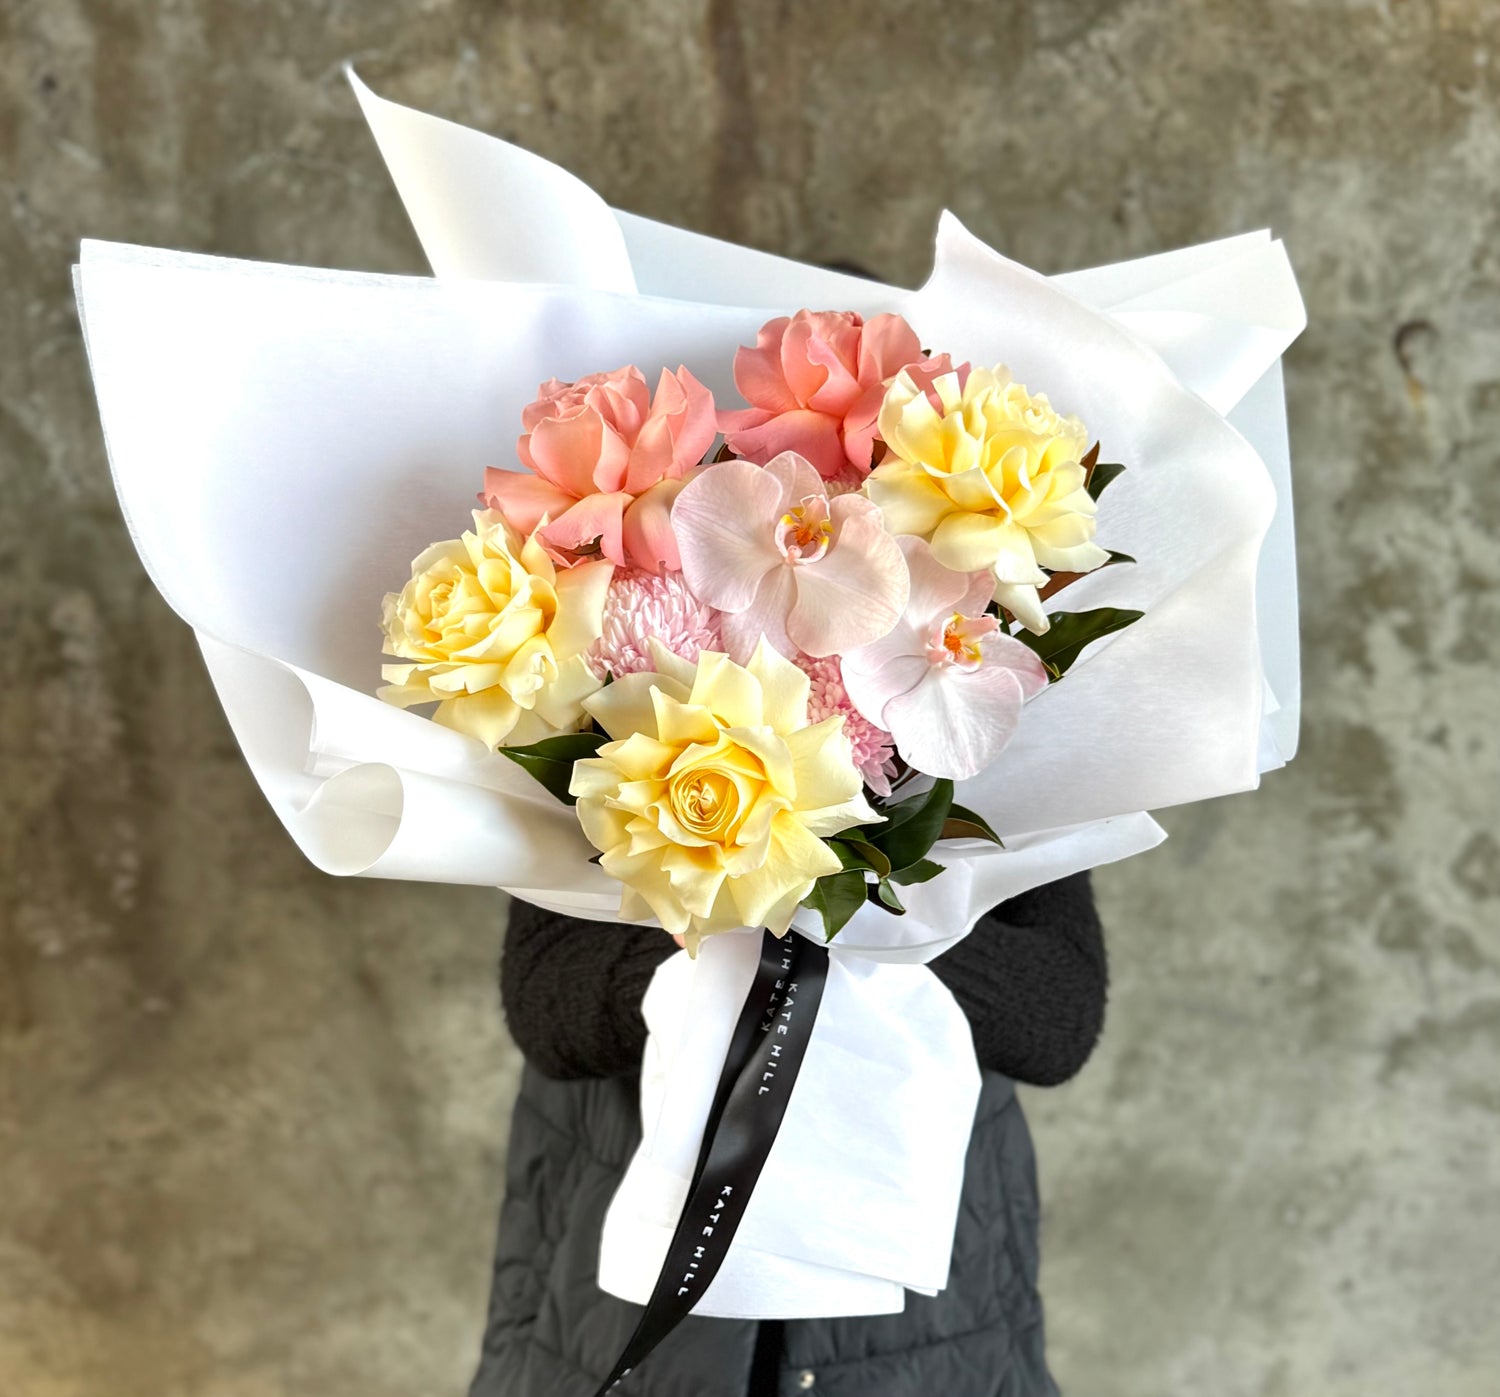 Close up image of florist holding a lemon and blush bouquet in front of a concrete wall.